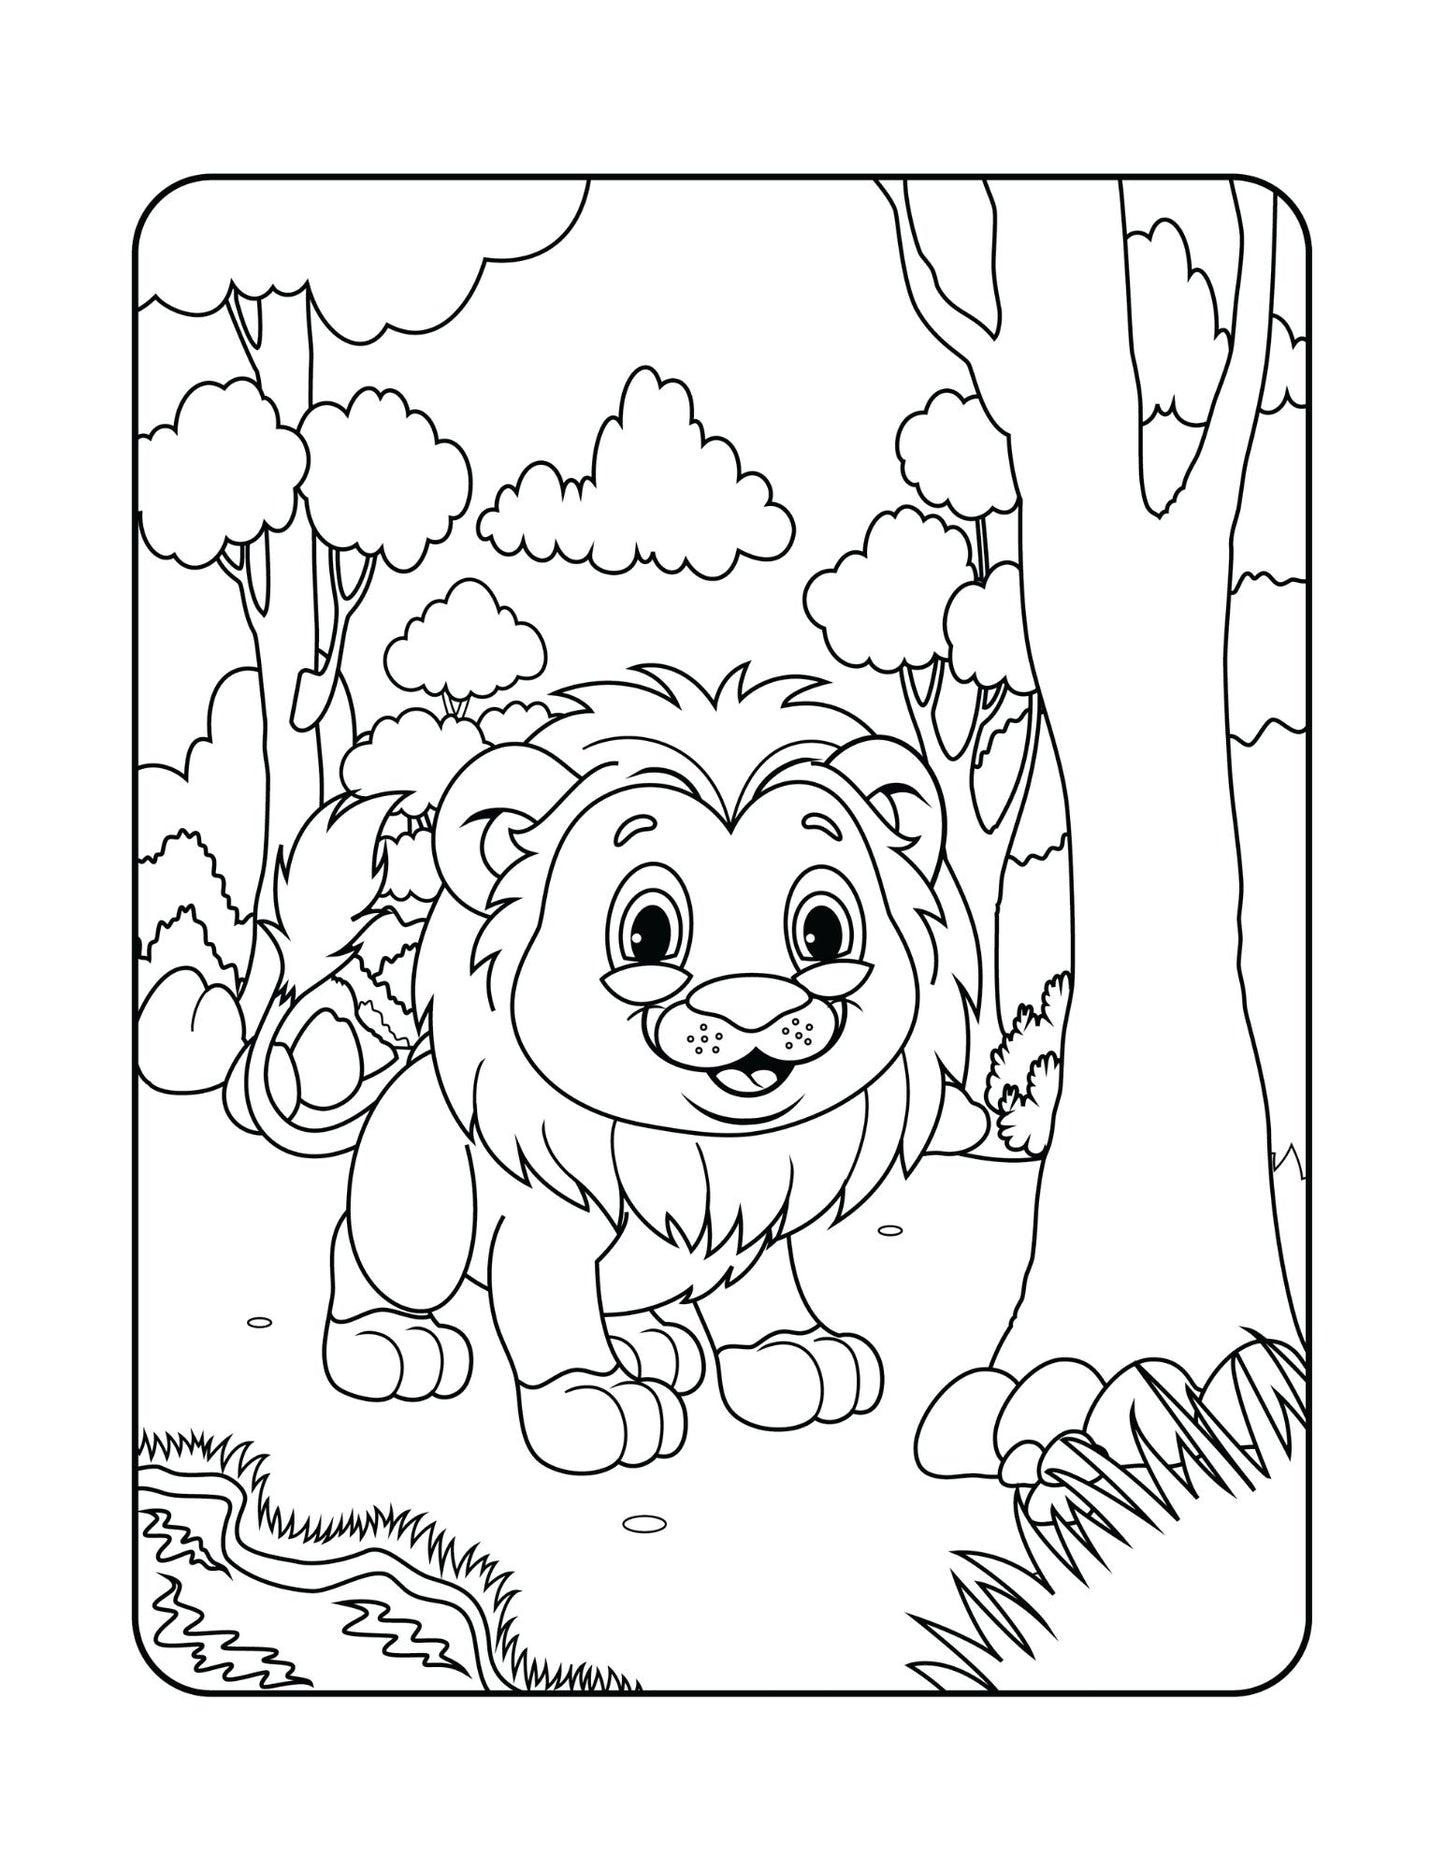 Happy Wild Animals Coloring Book For Kids Adults Zoo Animal Coloring Book 50 Jungle Animals Coloring Book Wild Animals Adult Coloring Book